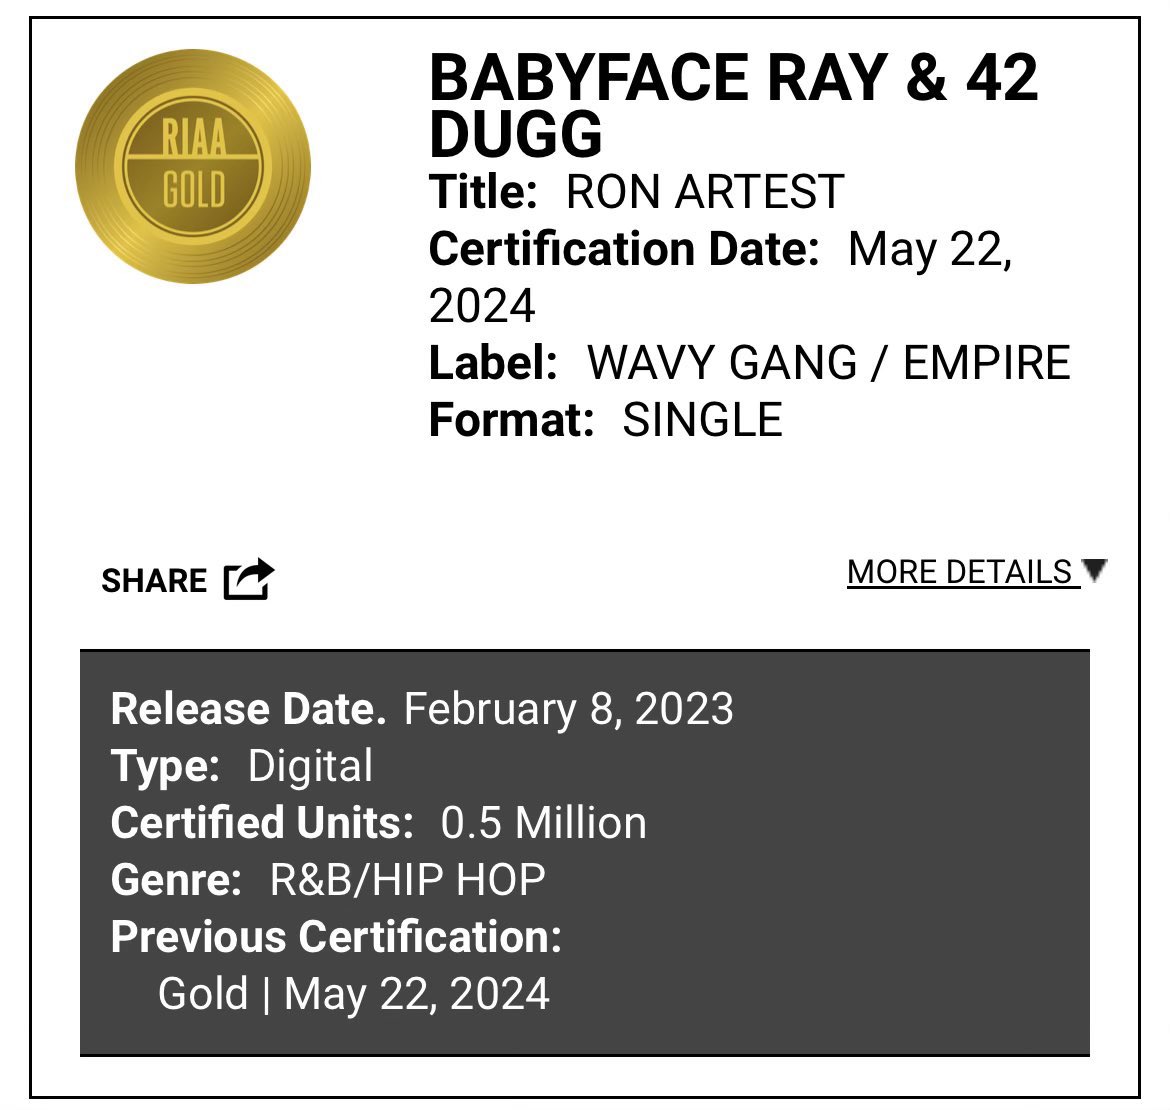 Congrats to @babyfaceray on the gold certification for #RonArtest featuring #42Dugg 🏆📀